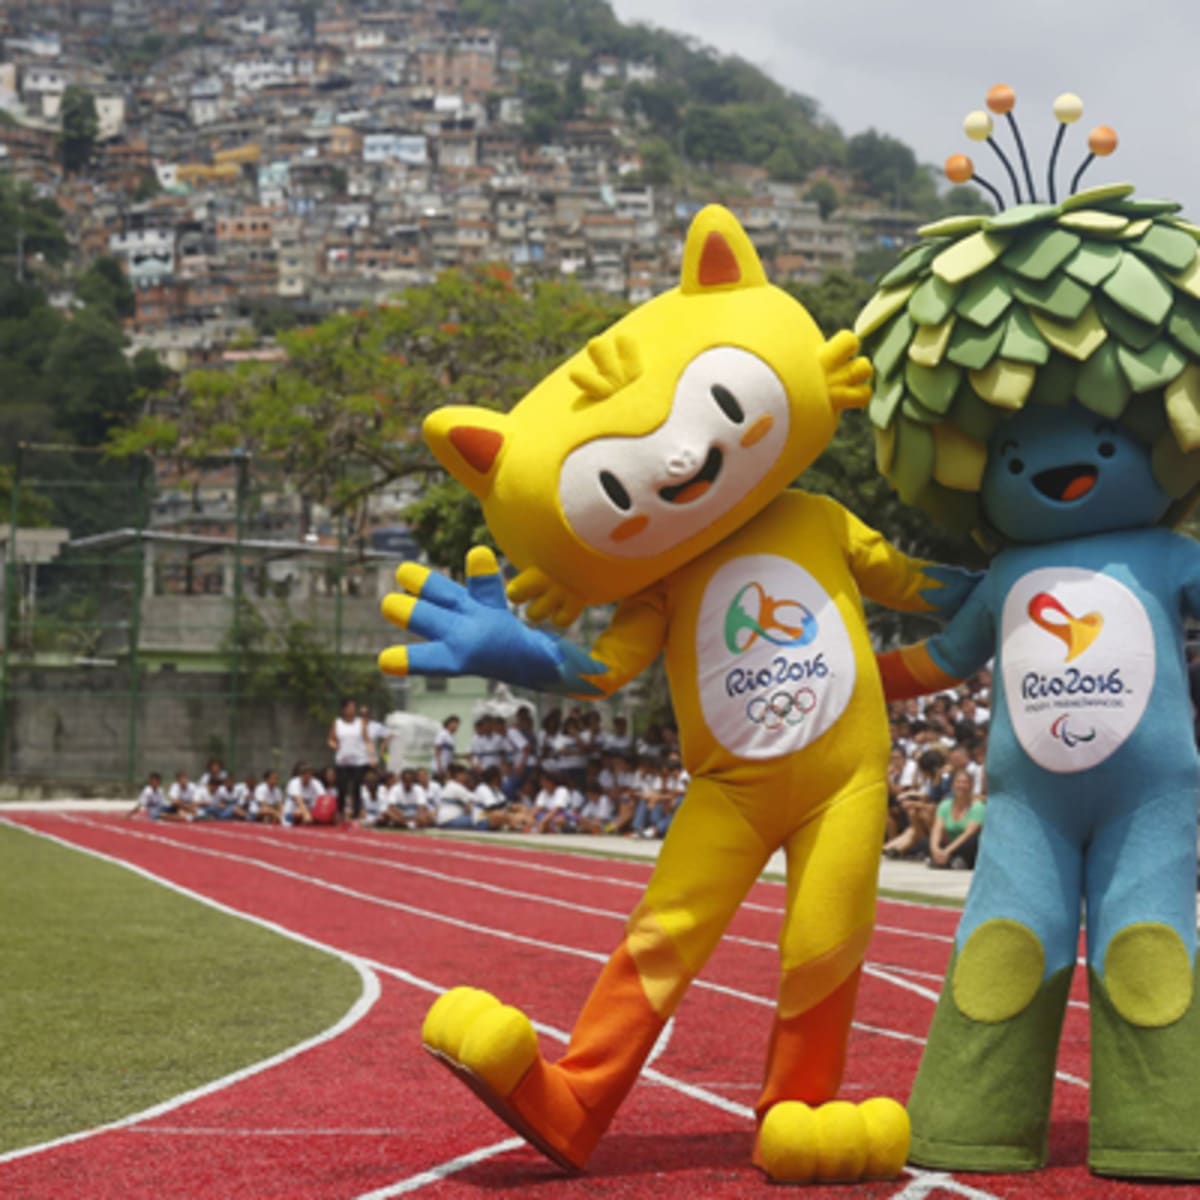 Meet The 16 Olympic Mascots Si Kids Sports News For Kids Kids Games And More